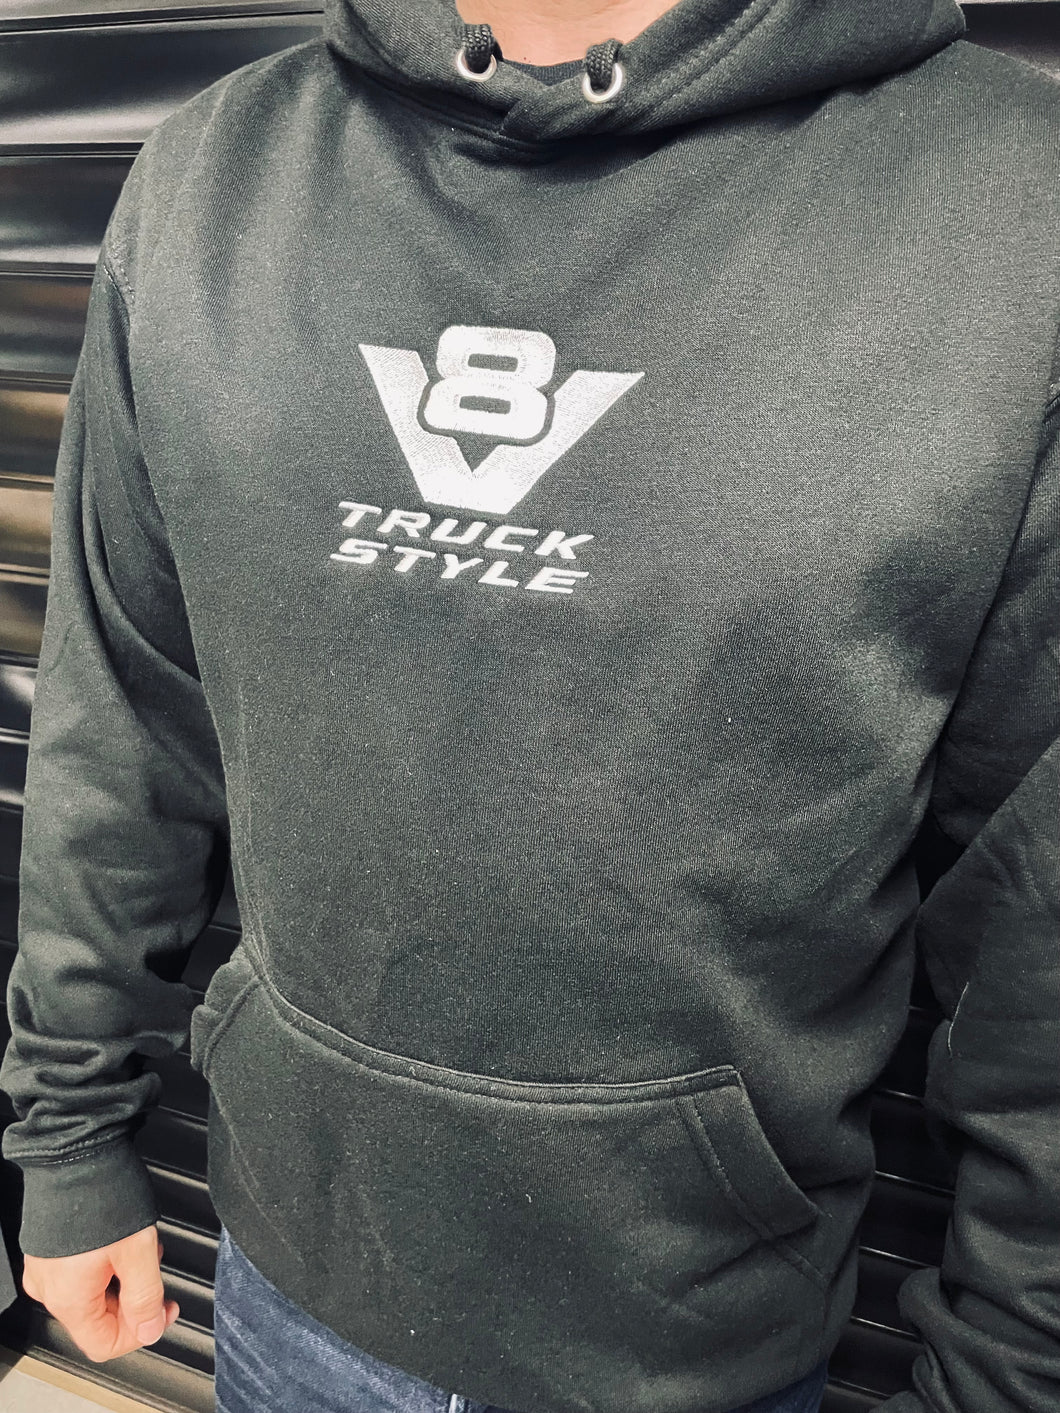 TruckStyle V8 Embroidered Hoody